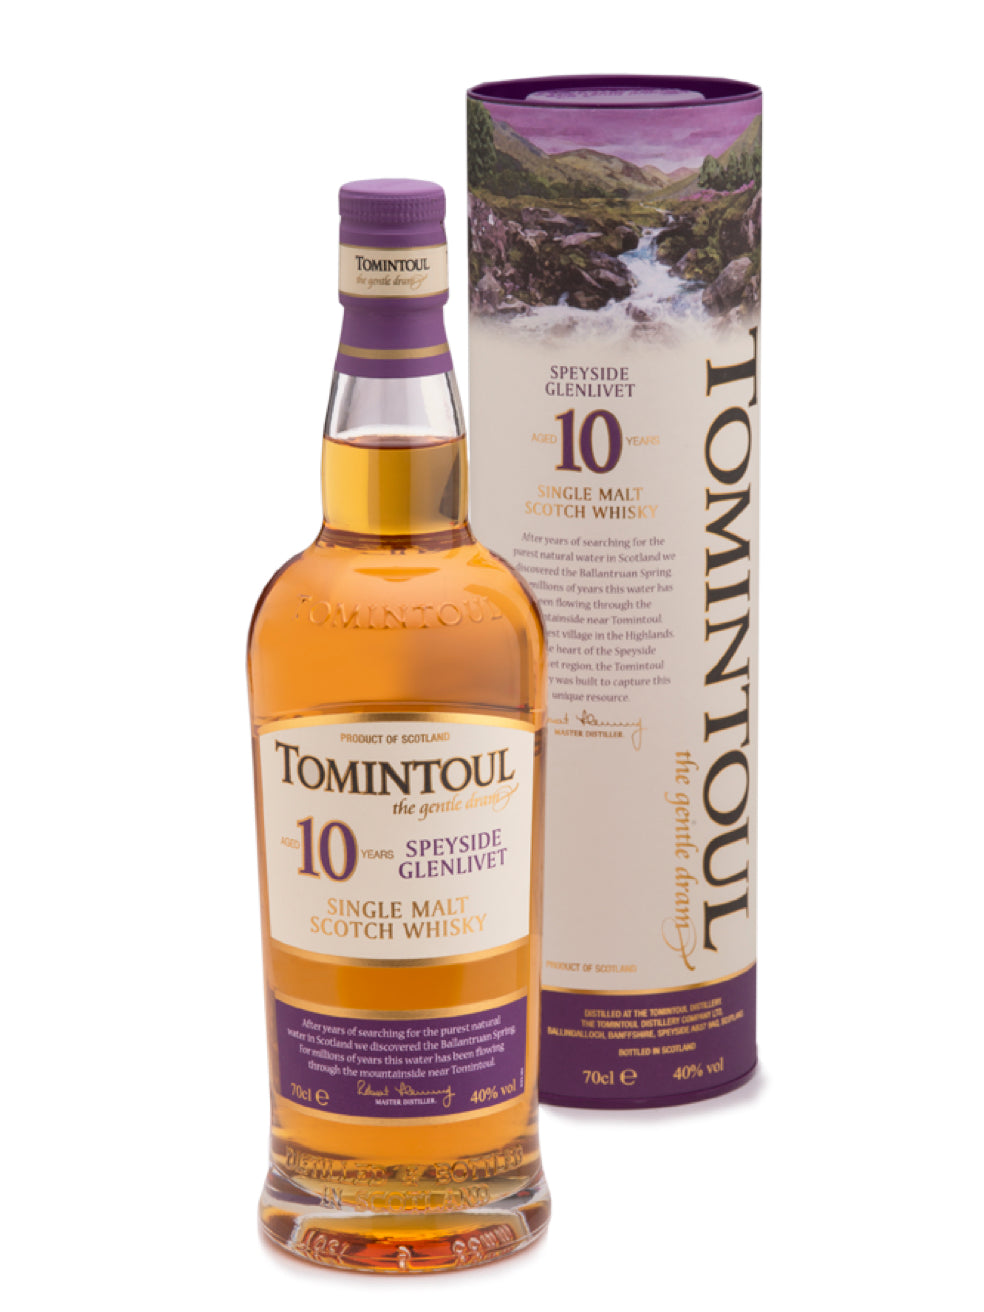 Sited in the highest village in the Highlands of Scotland, the Tomintoul distillery offers a subtle dram. Pith dark chocolate.